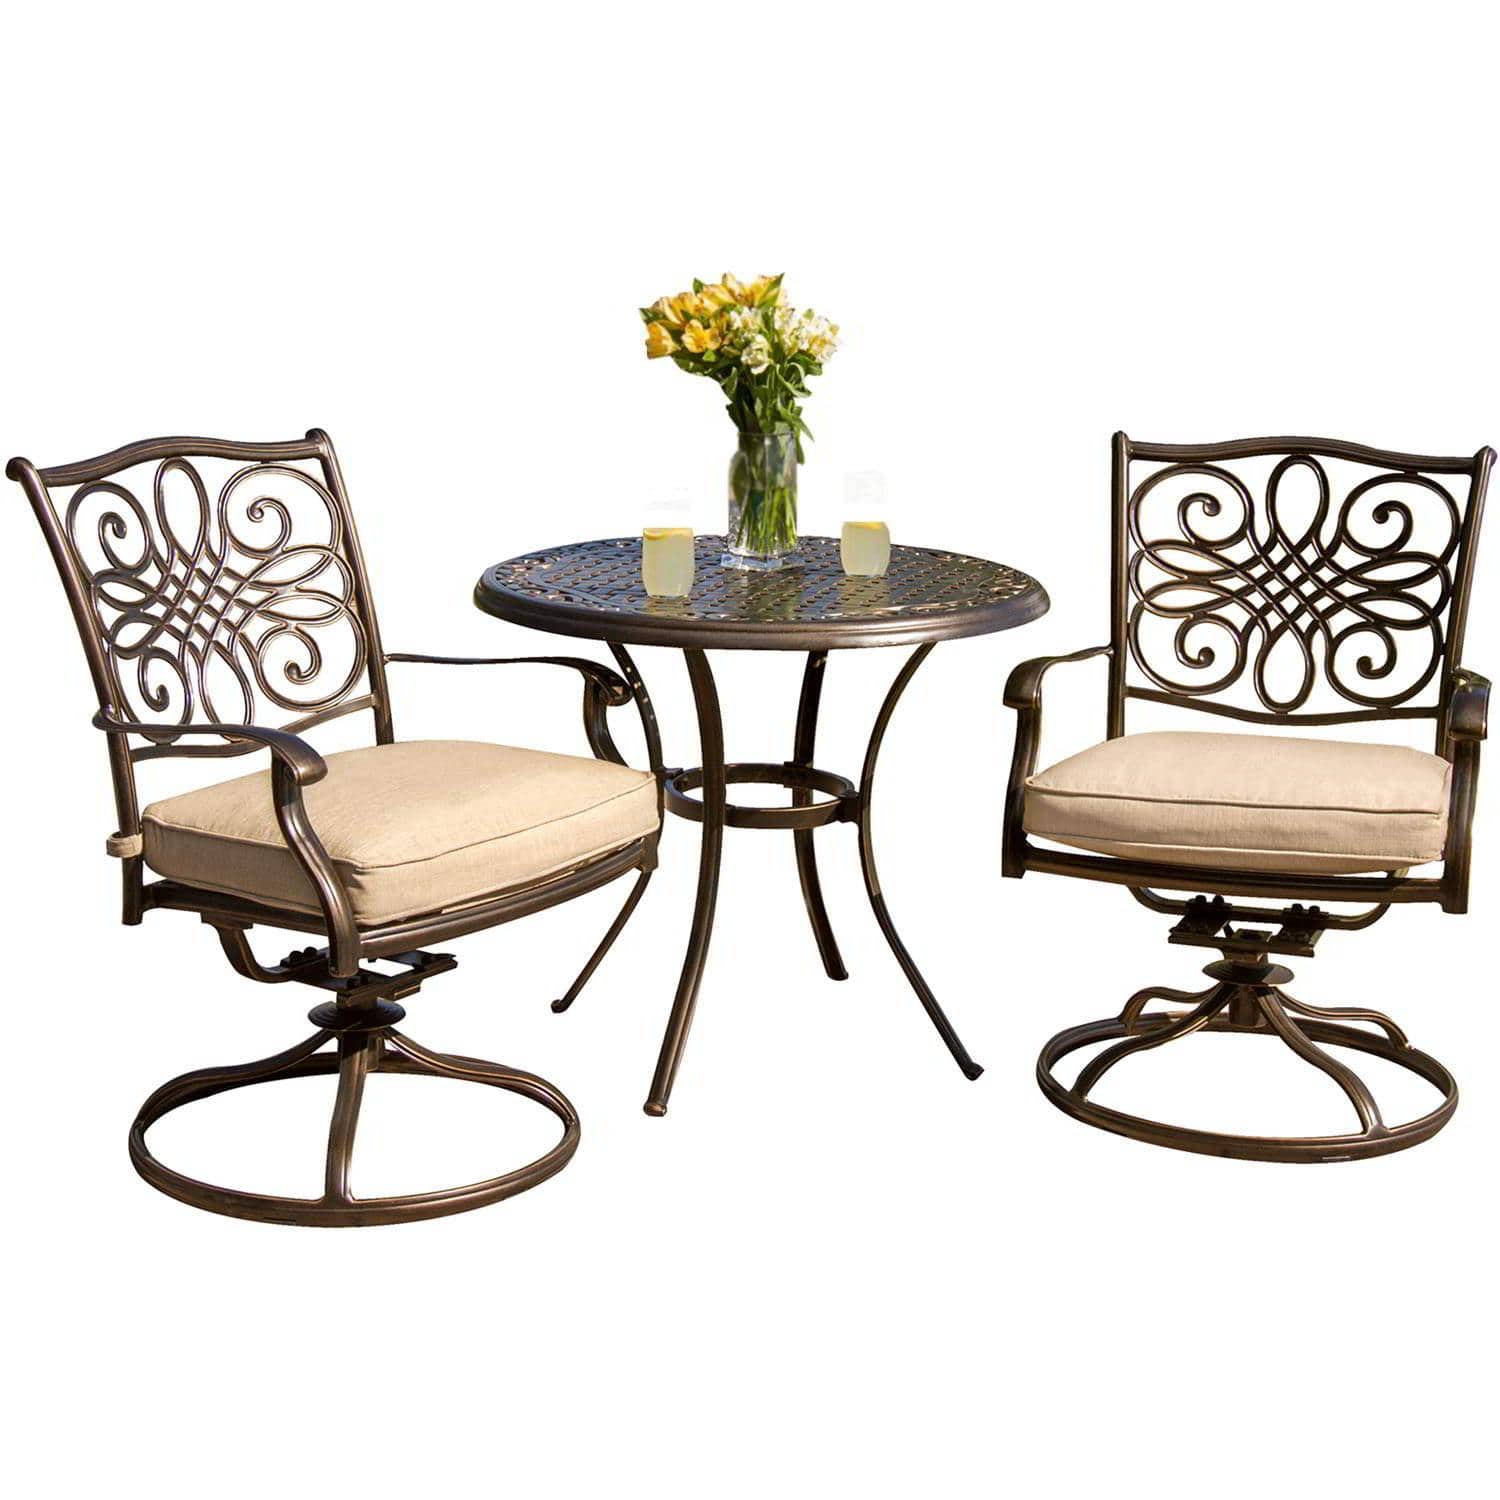 Hanover Bistro Set Hanover Traditions 3-Piece Bistro Dining Set with Two Alumicast Swivel Rockers and a 32 in. Round Table - TRADITIONS3PCSW